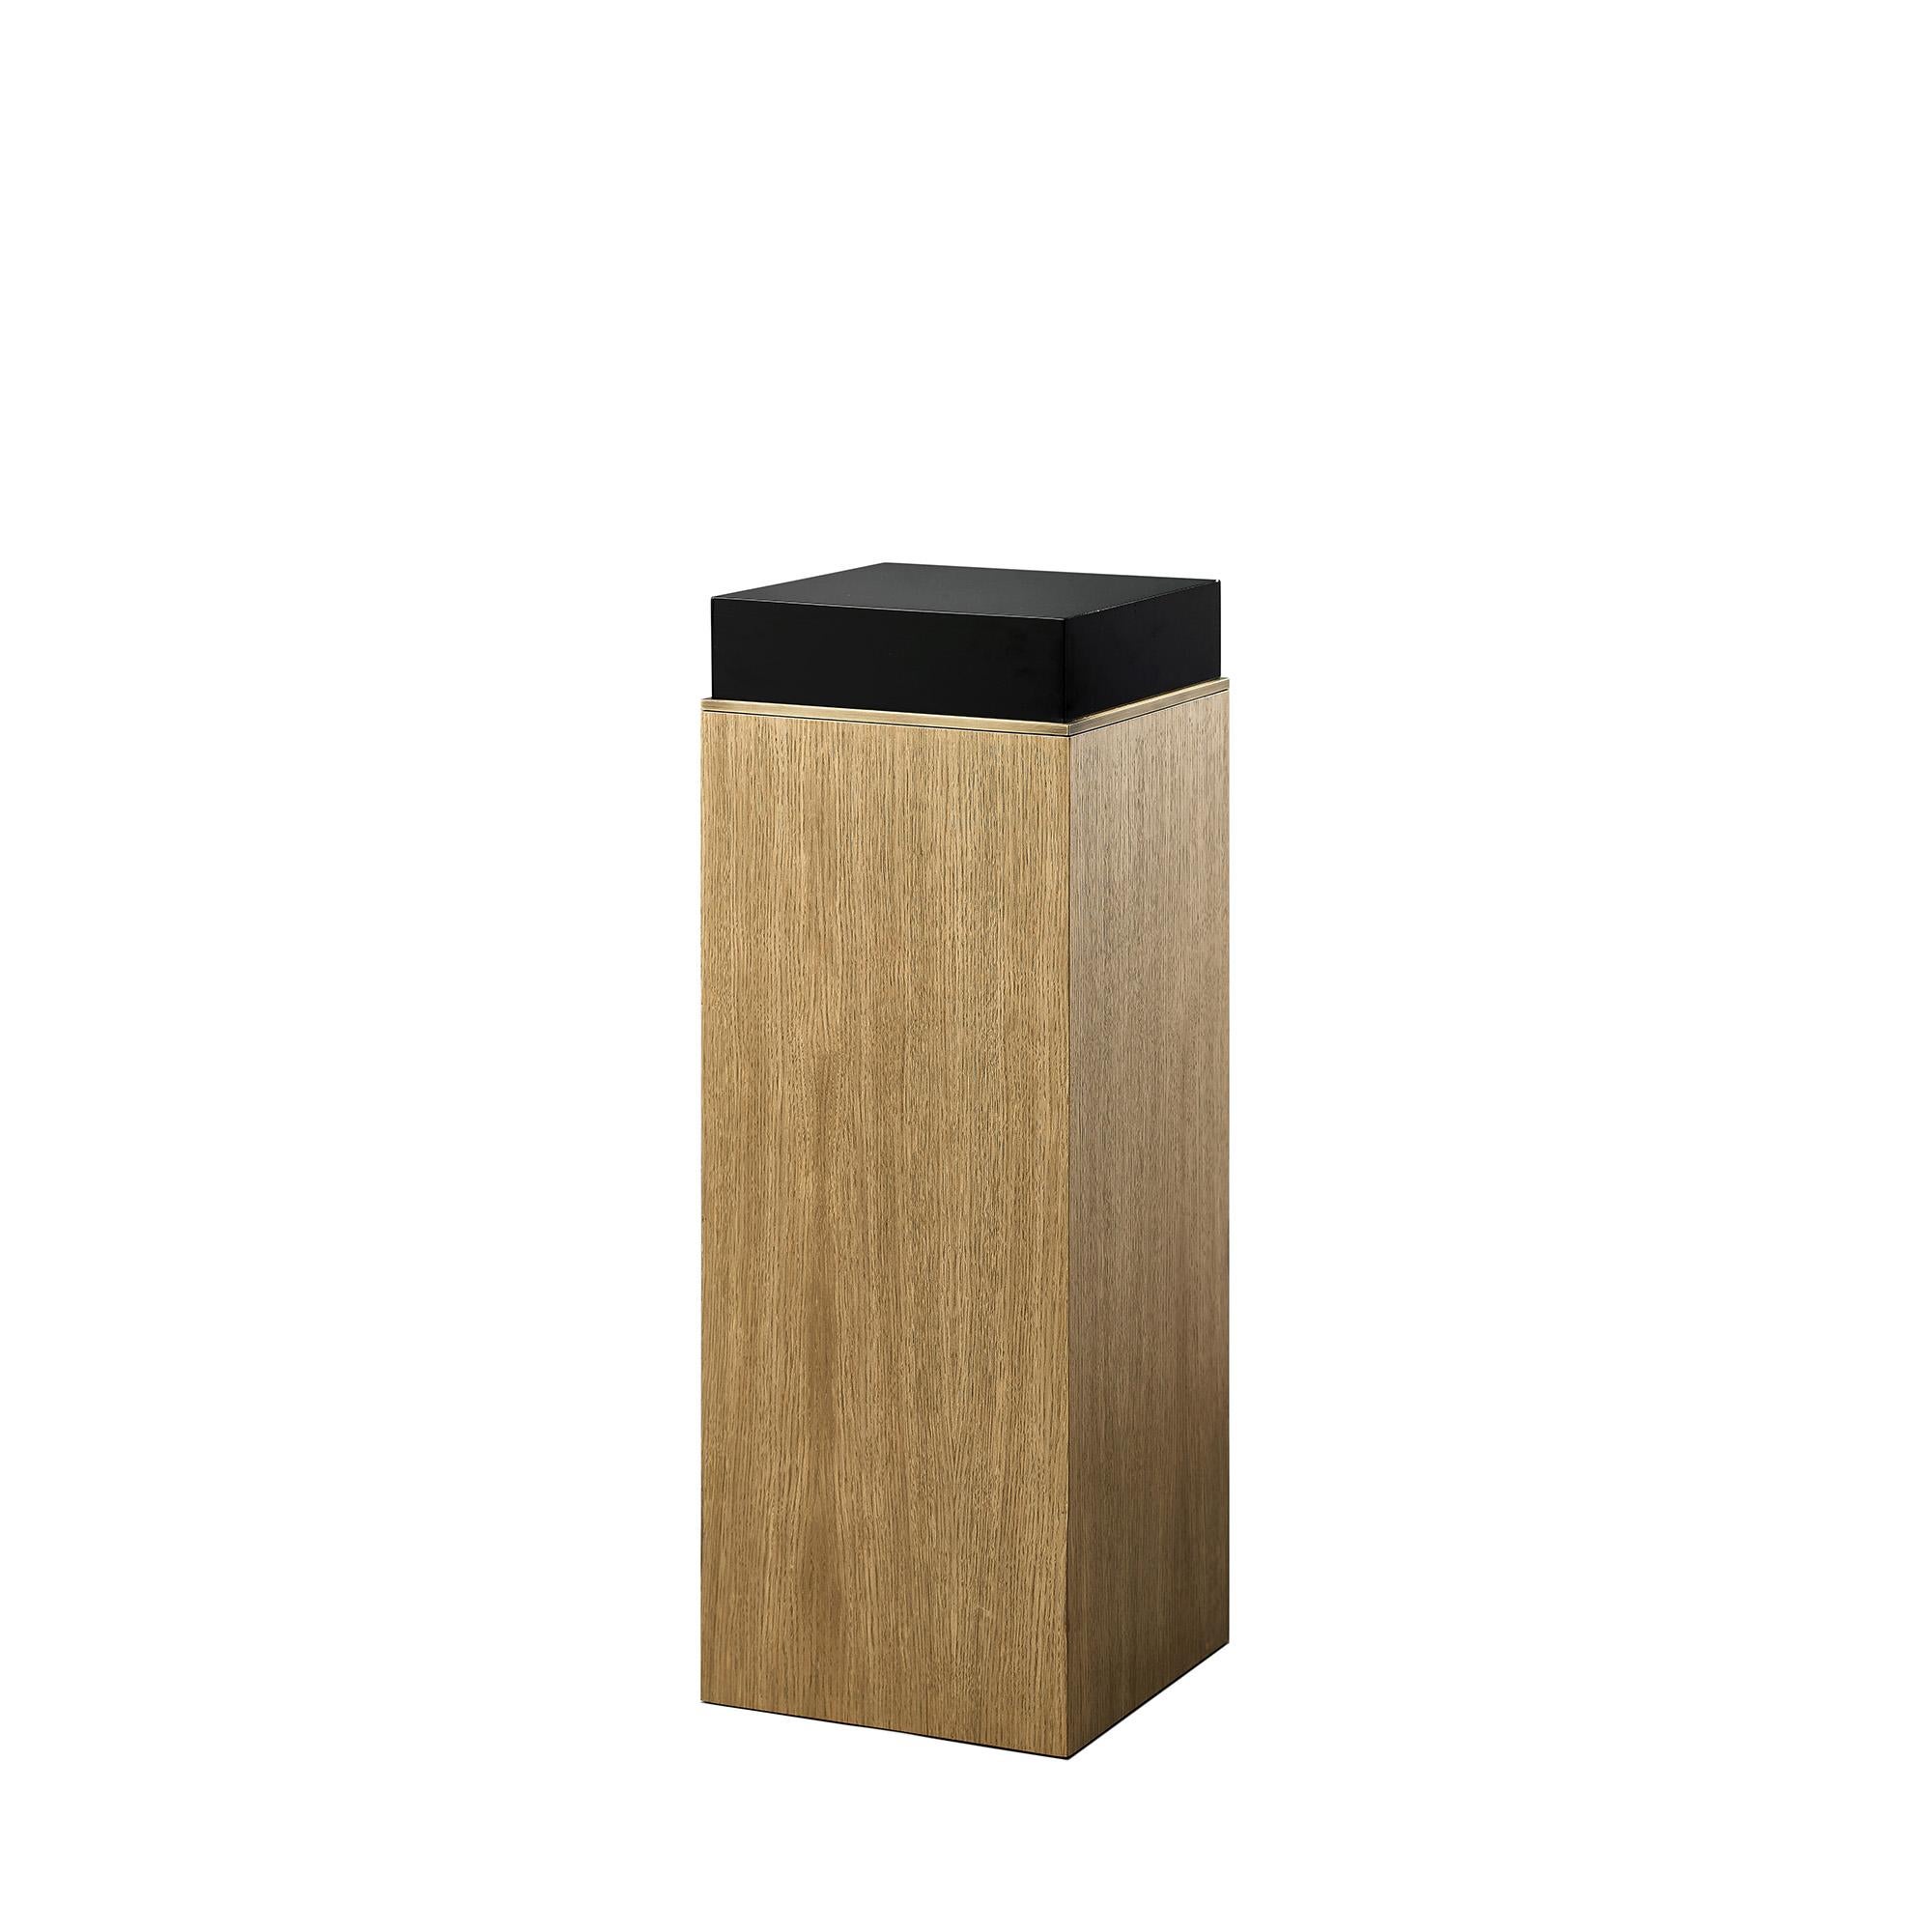 Block Pedestal by DUISTT 
Dimensions: W 35 x D 35 x H 100 cm
Materials: Black Limed Oak, High Gloss Black Lacquered Wood and Bronze

The BLOCK pedestal is a strong piece composed of clean lines and allowing a variety of finishes. The black limed oak